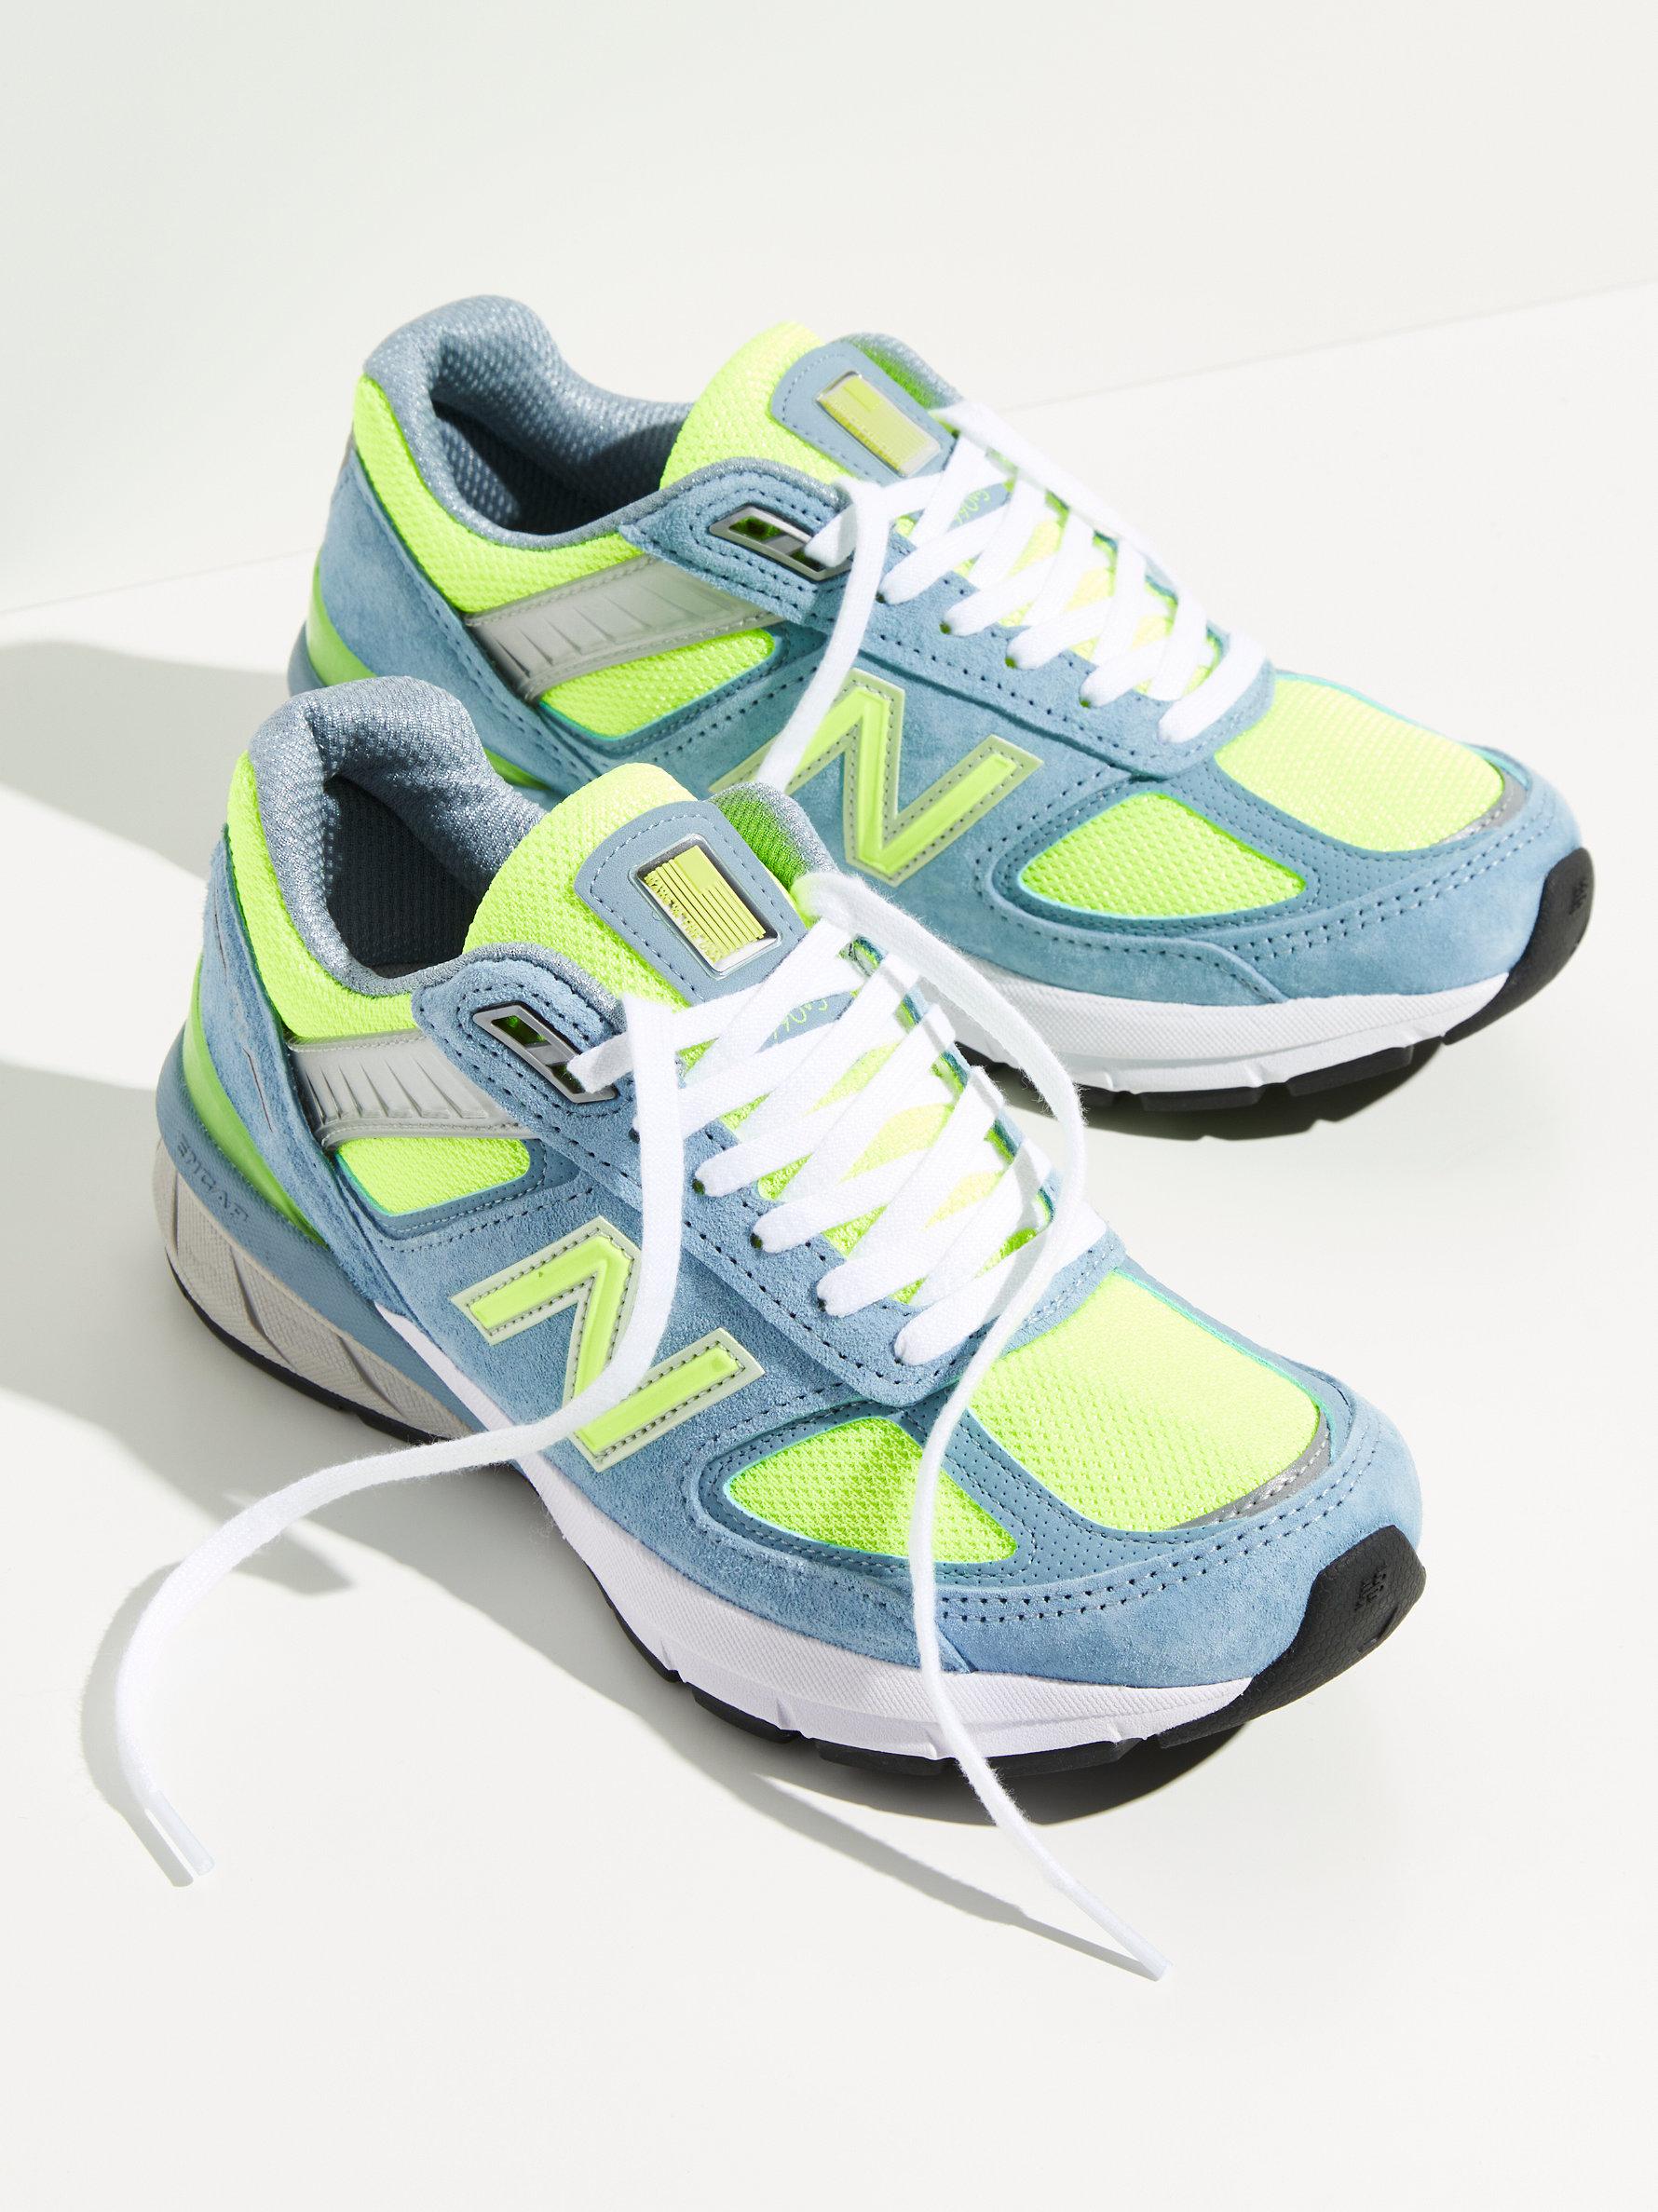 Free People New Balance Made Us 990v5 Sneakers | Lyst